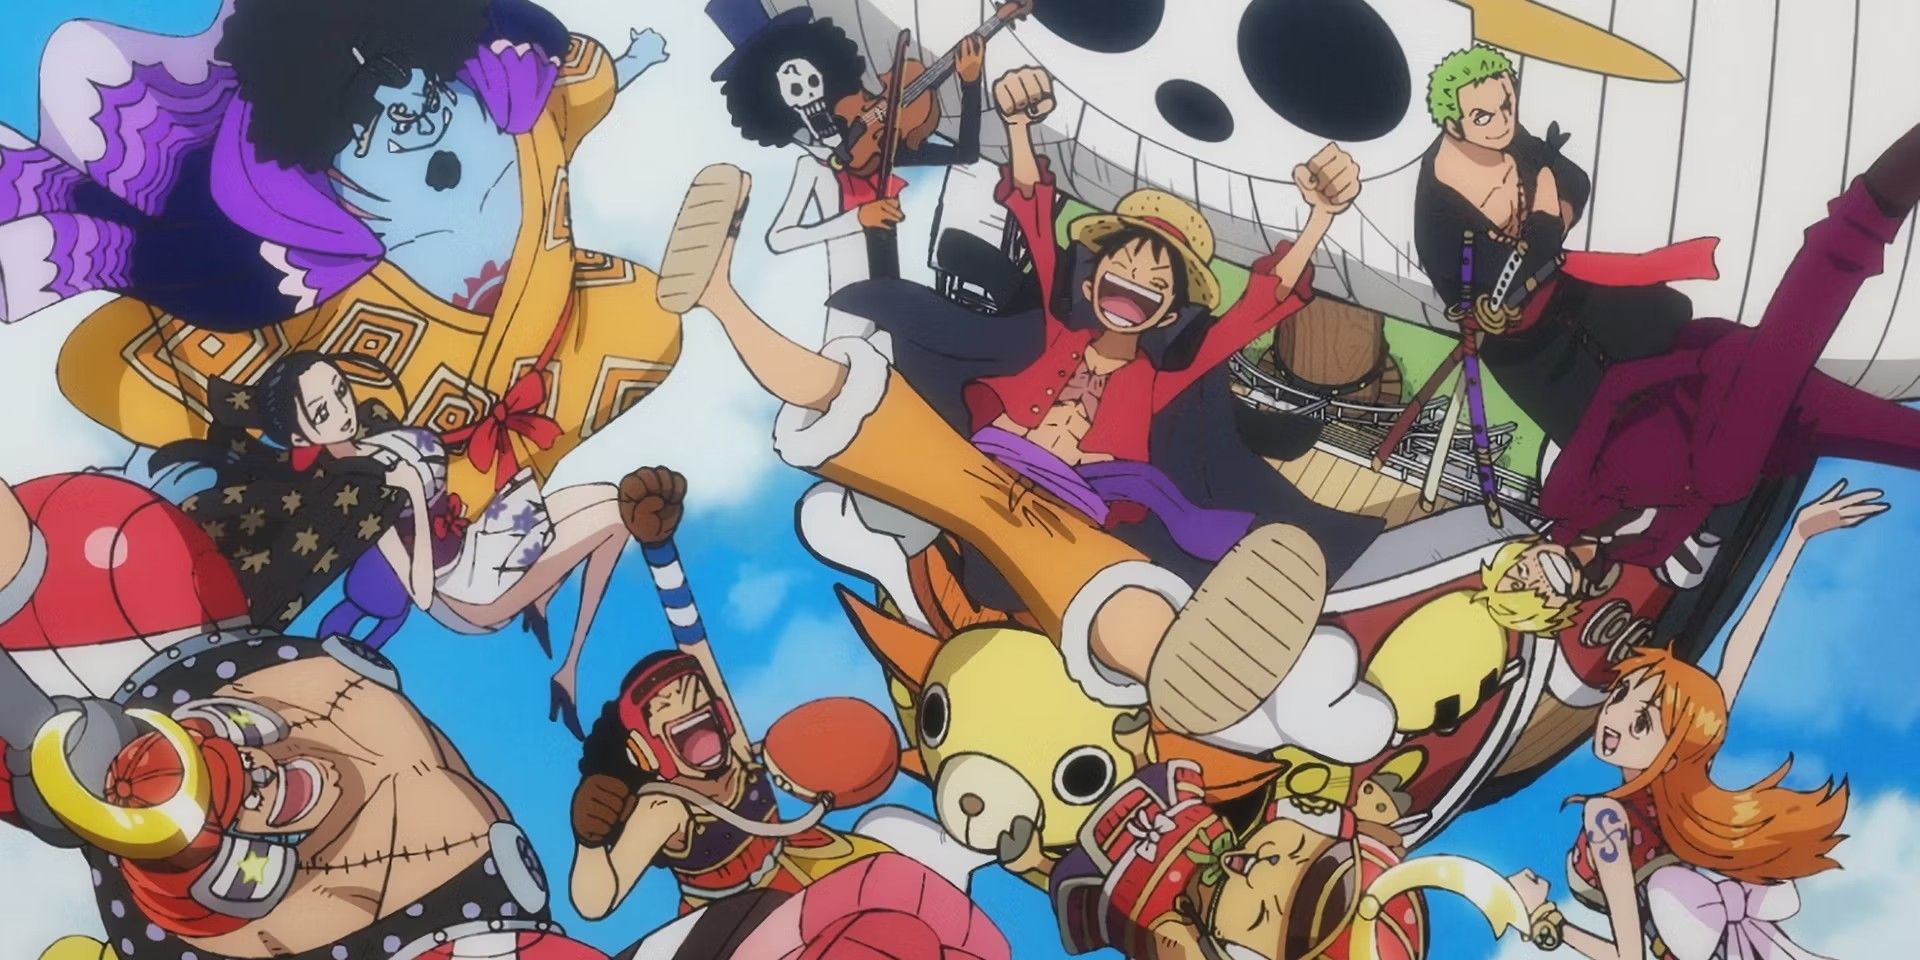 Jinbe and the rest of the Straw Hat Pirates having fun in a One Piece opening